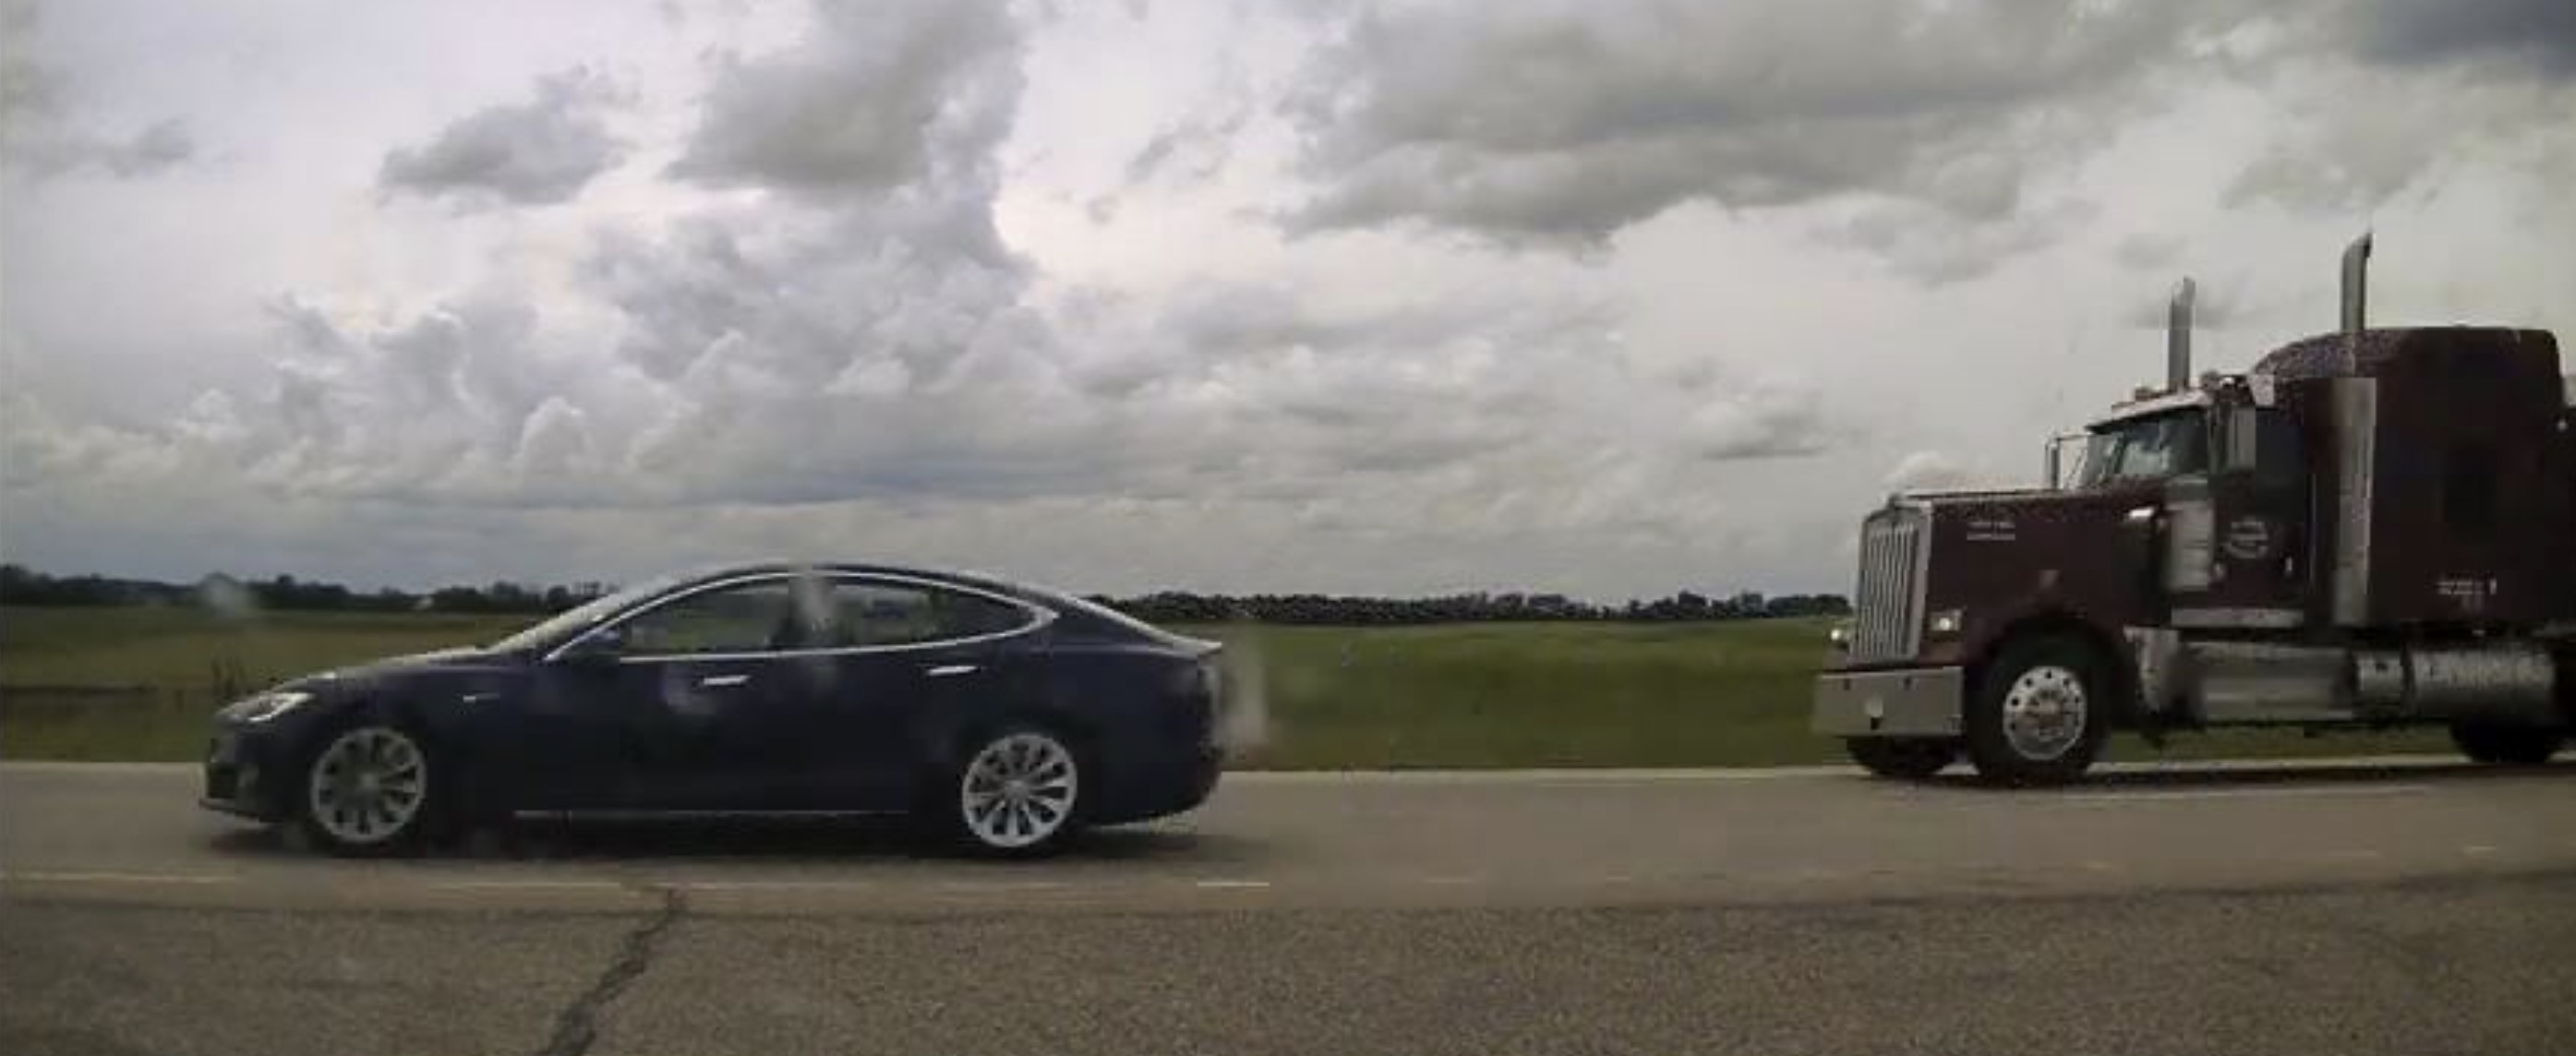 A Tesla driver was caught sleeping on Autopilot at high ...